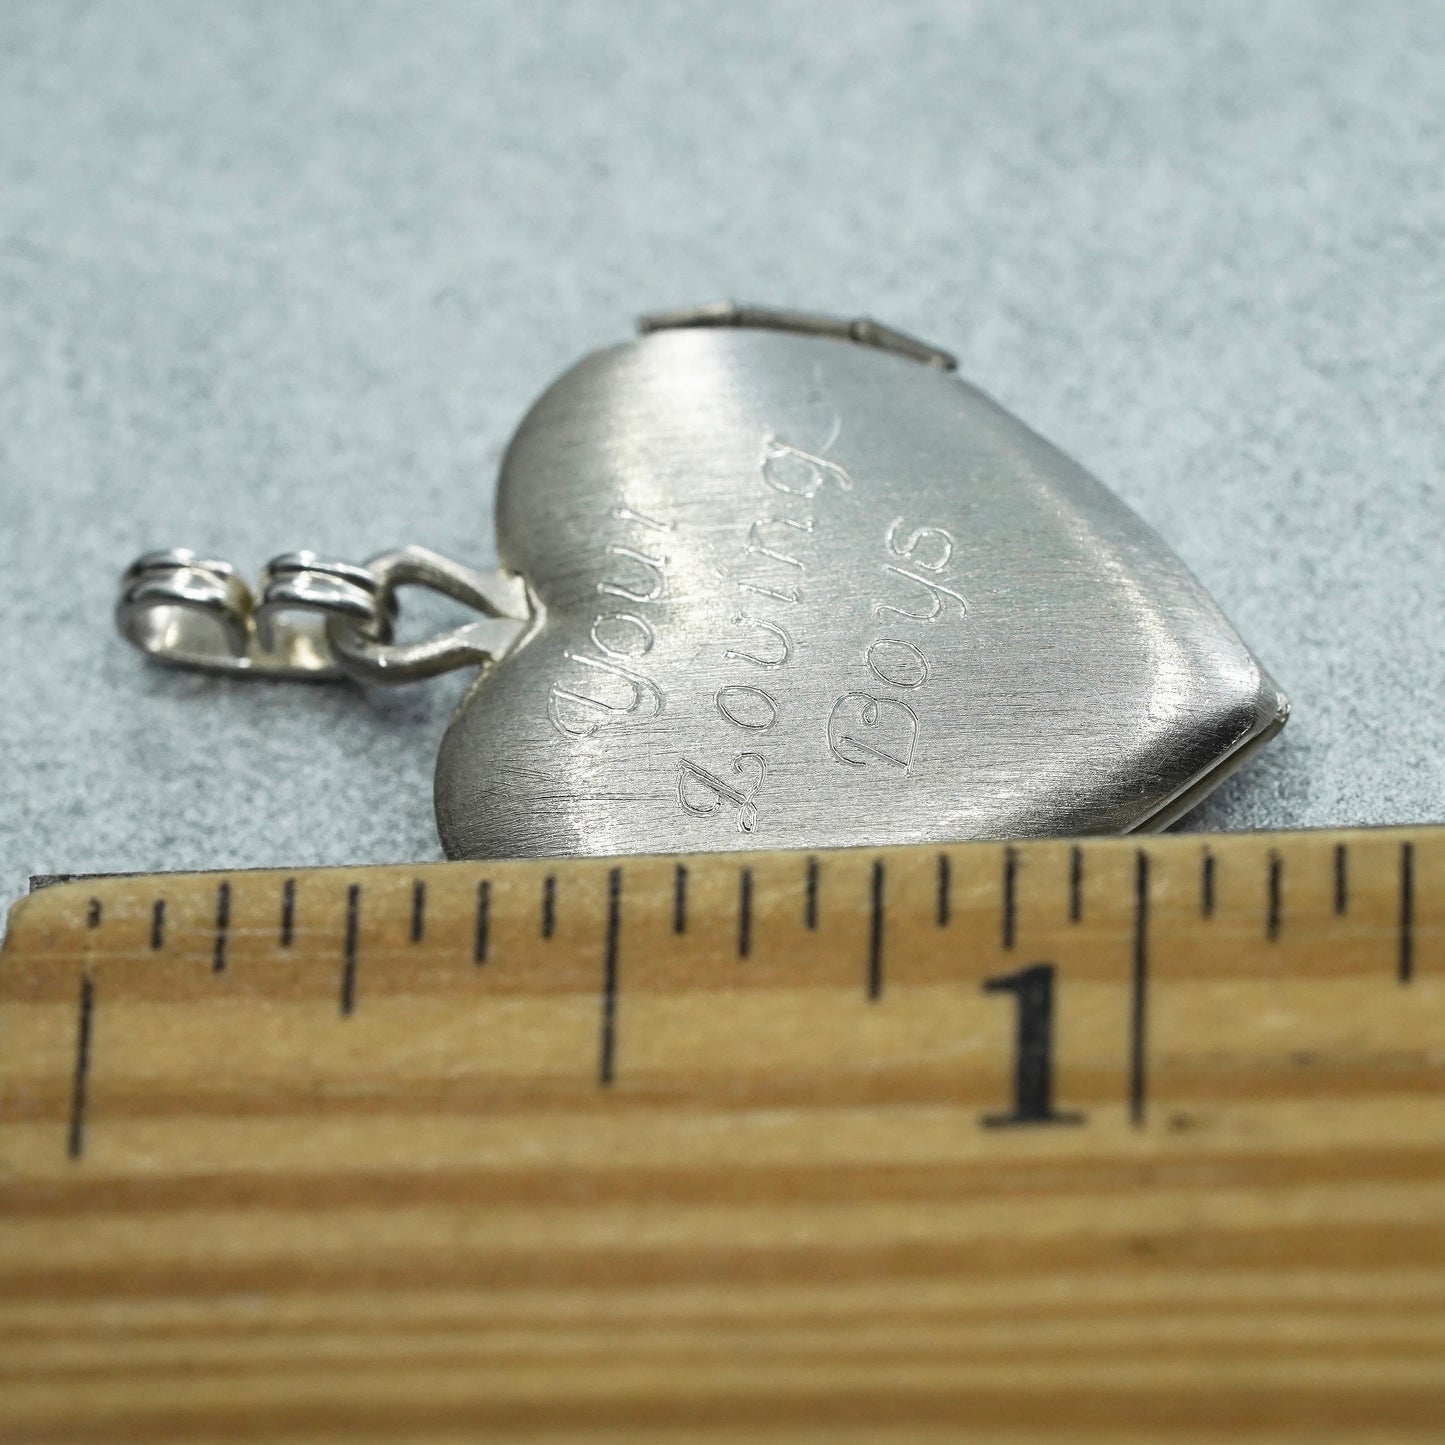 Sterling silver charm, textured 925 heart photos locket “your loving boys”